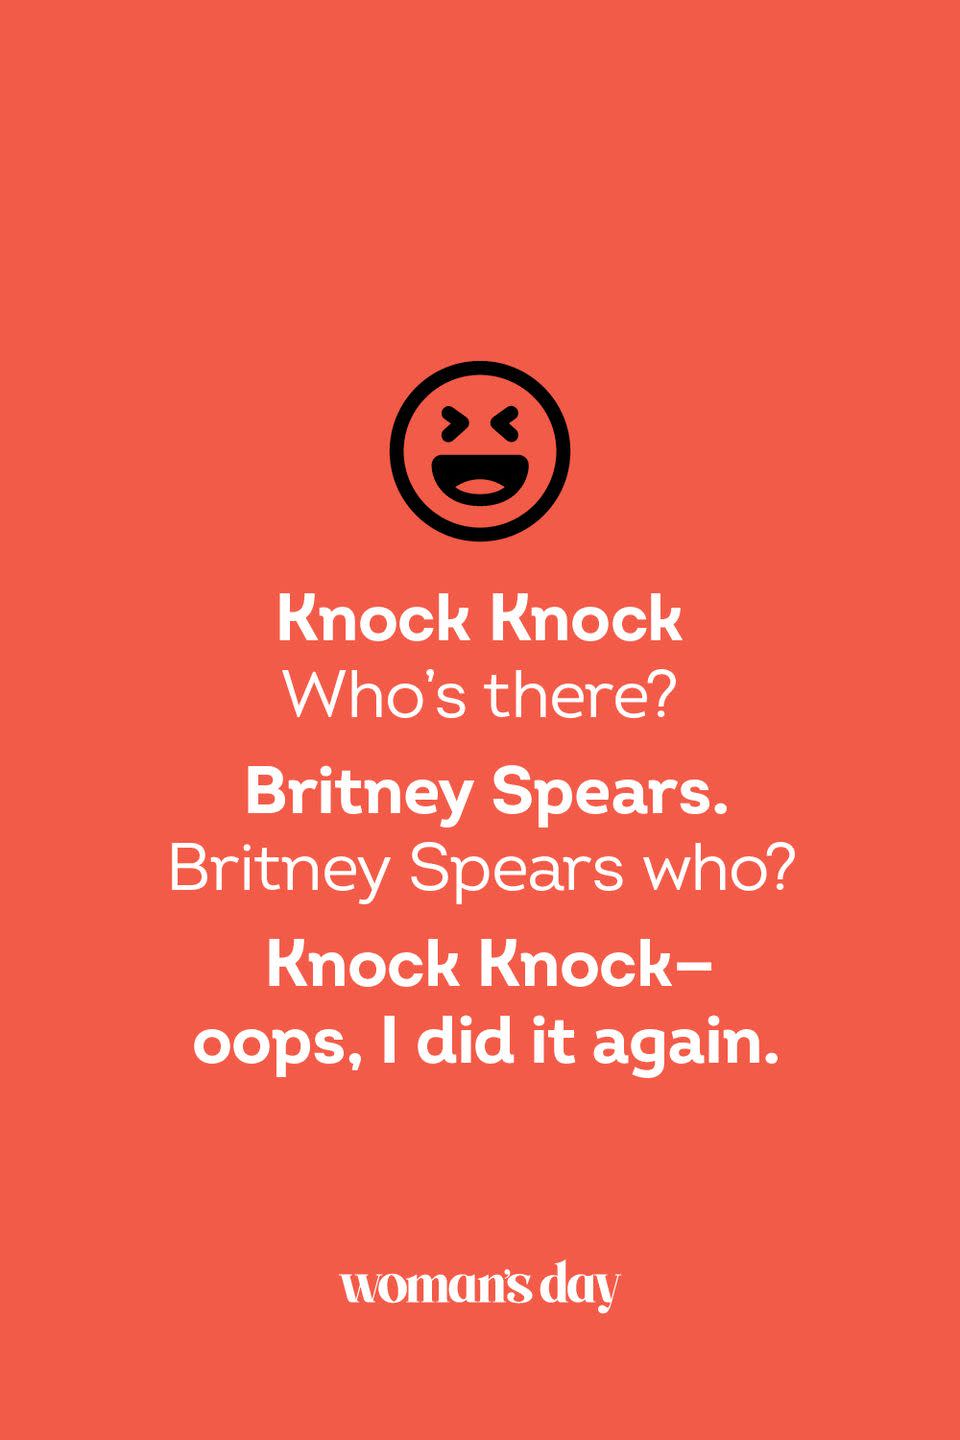 <p><strong>Knock Knock</strong></p><p><em>Who’s there? </em></p><p><strong>Britney Spears.</strong></p><p><em>Britney Spears who? </em></p><p><strong>Knock Knock — oops, I did it again.</strong></p>